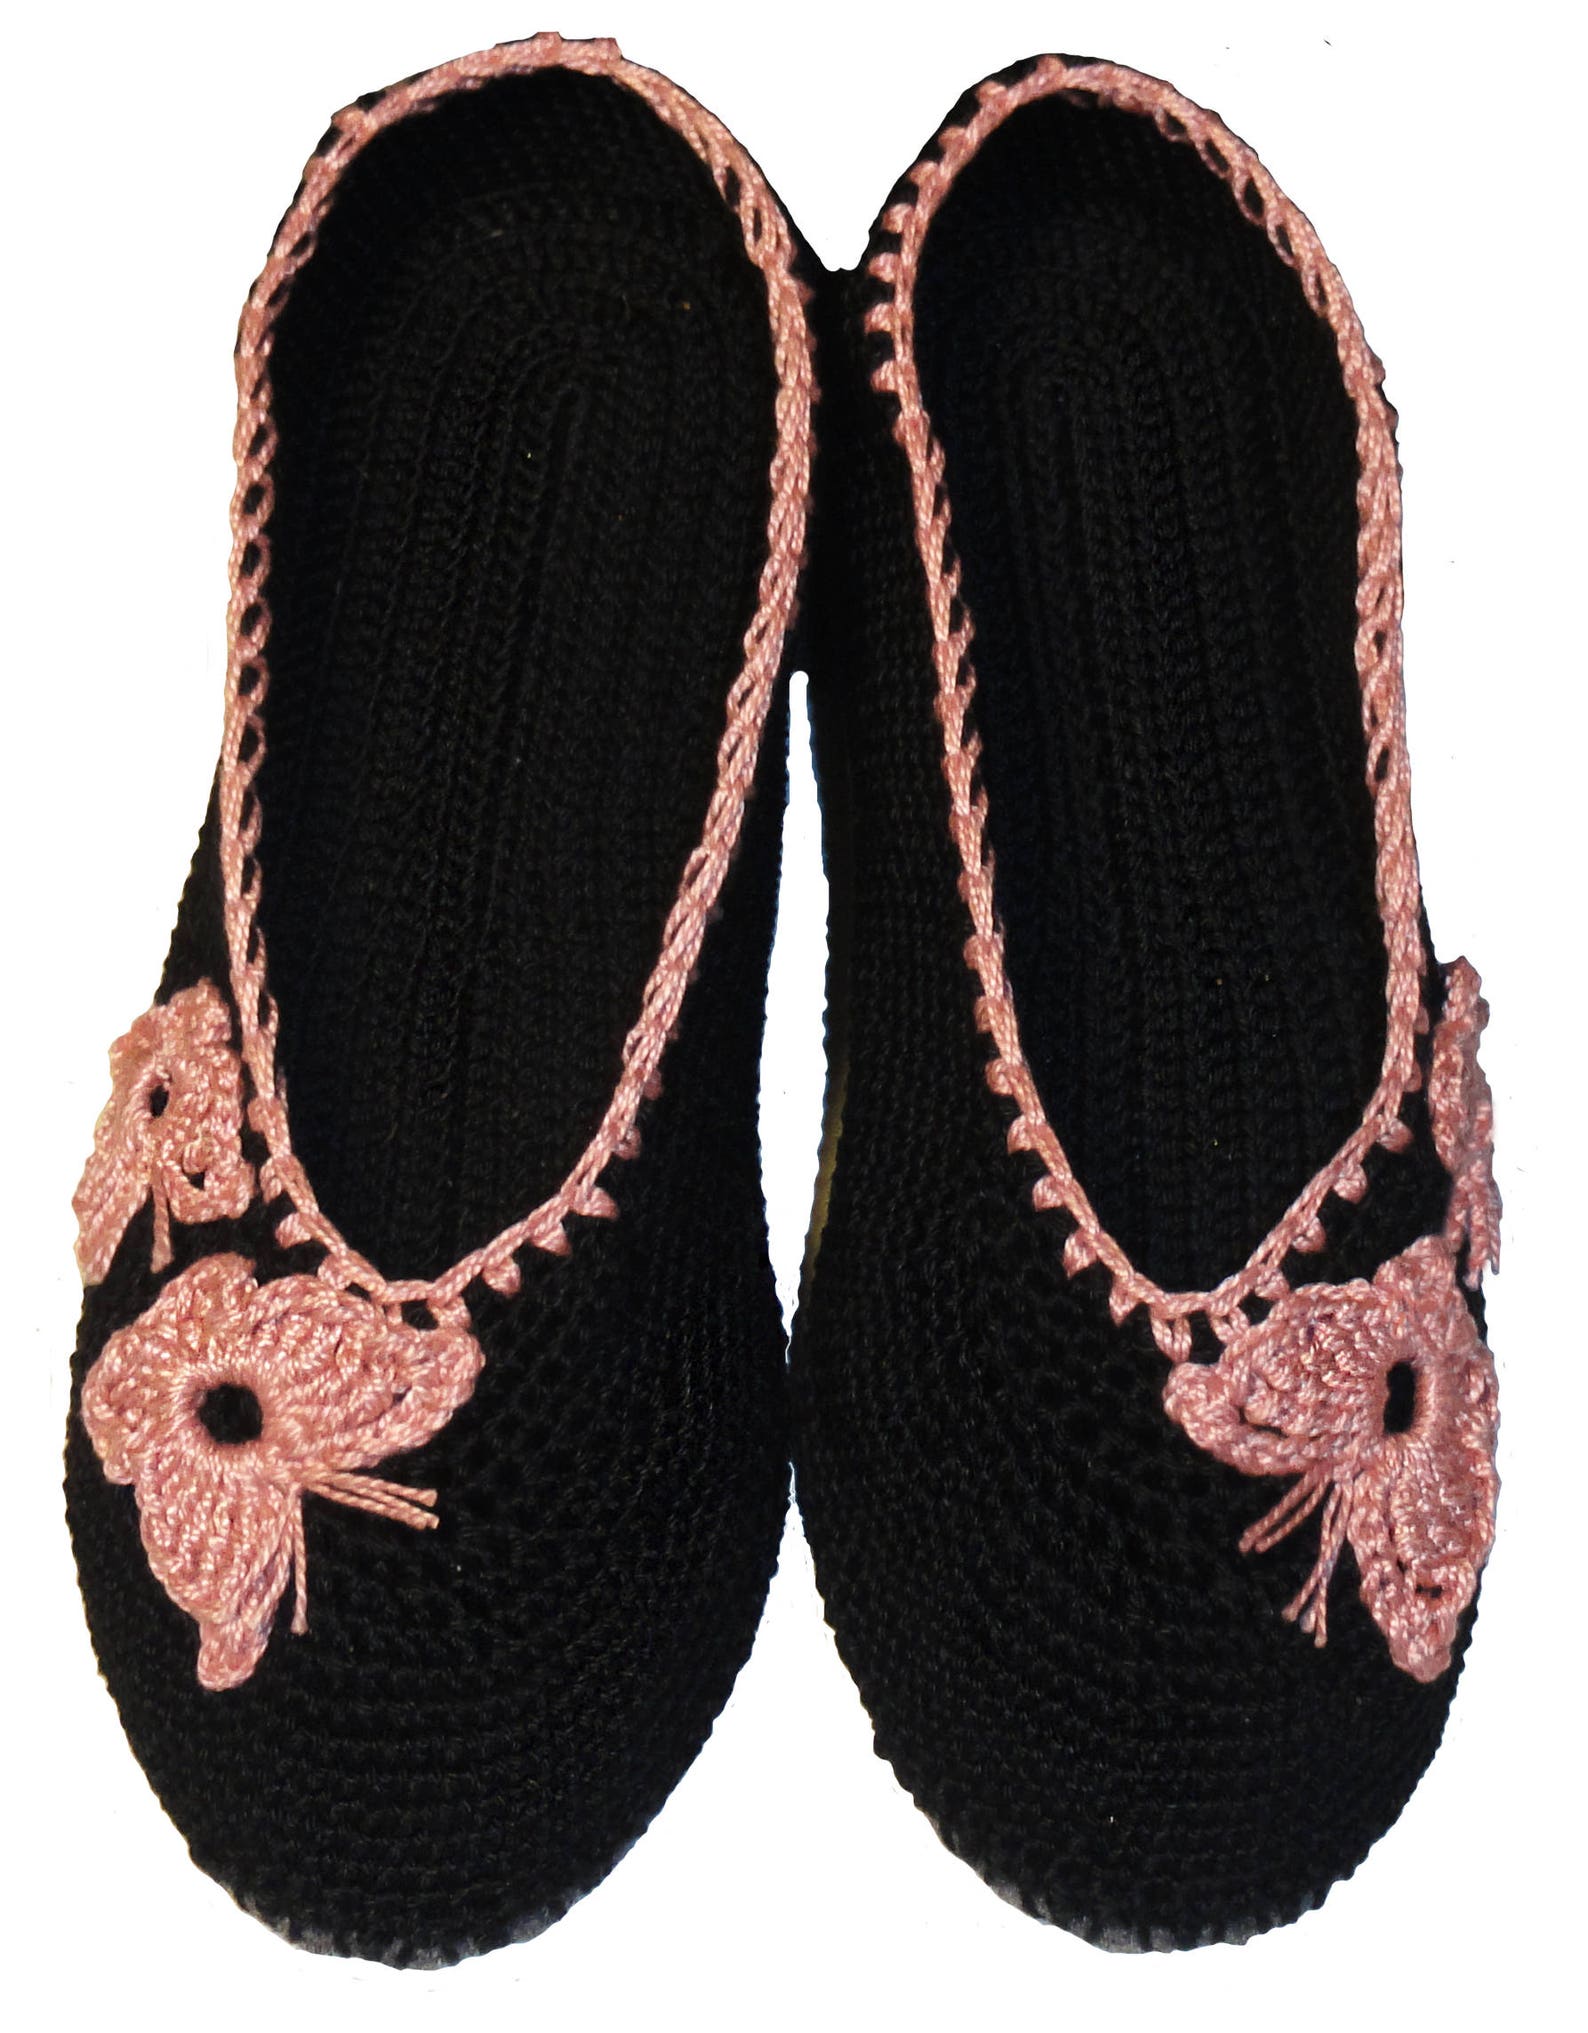 Сrochet slippers pattern, ballet shoes, slippers for women, slippers with butterflies pdf - pattern only